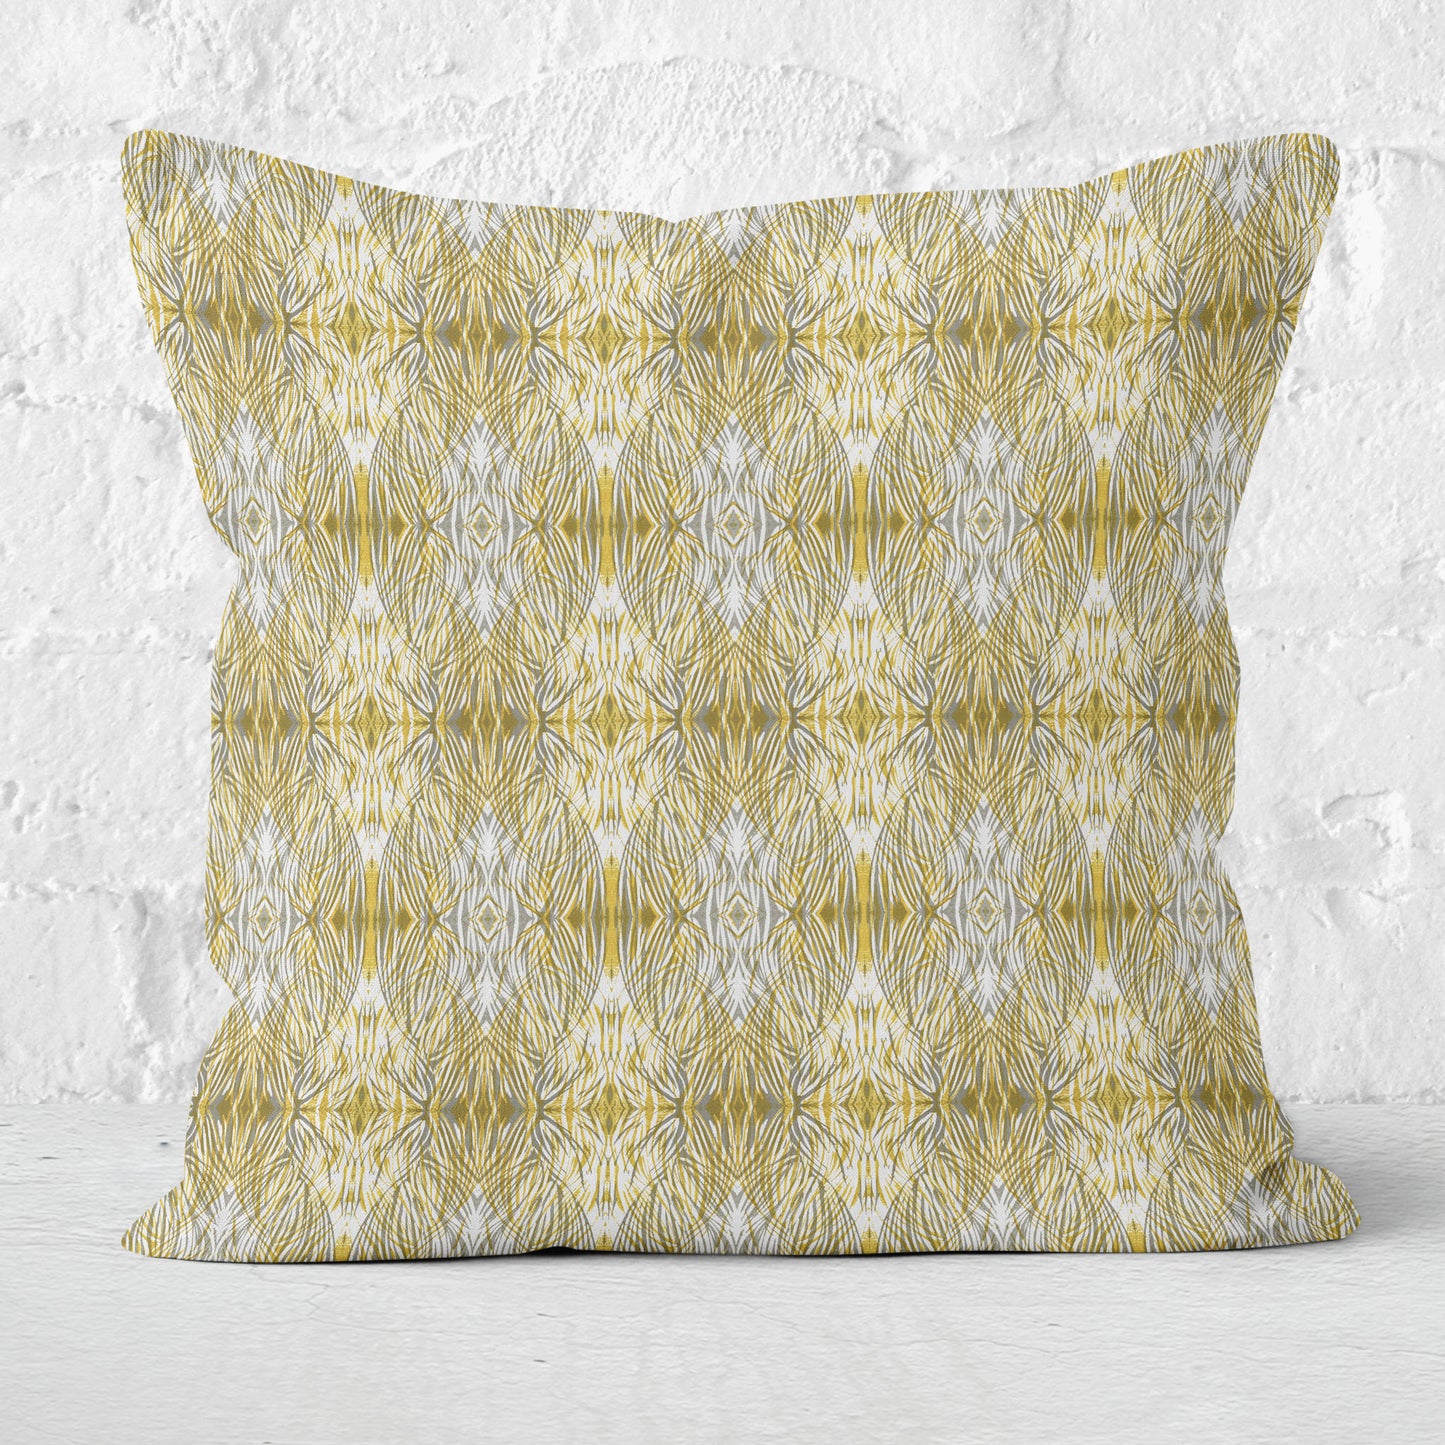 Throw pillow featuring linocut pattern in gold and gray.